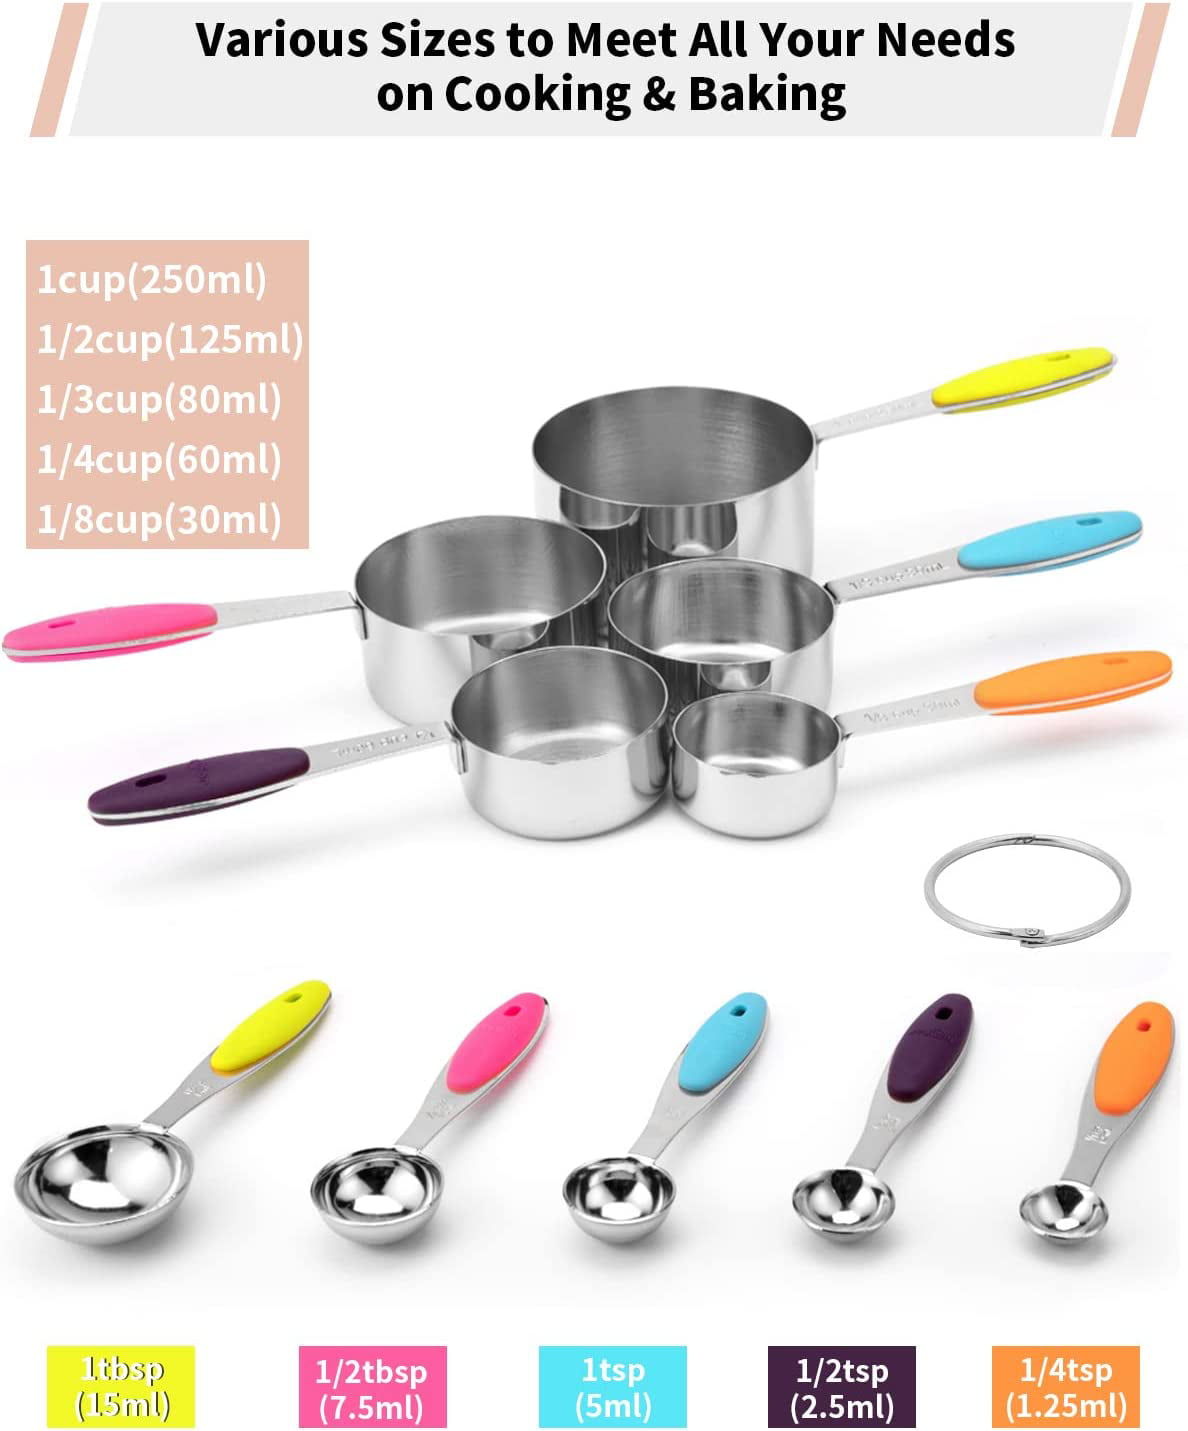  Measuring Cups and Spoons Set Of 10, Colorful Measuring Cups  Stainless steel, Liquid Measuring Cups and Dry Measuring Cup Set, Upgraded measuring  Cups, First Choice For Kitchen Baking: Home & Kitchen